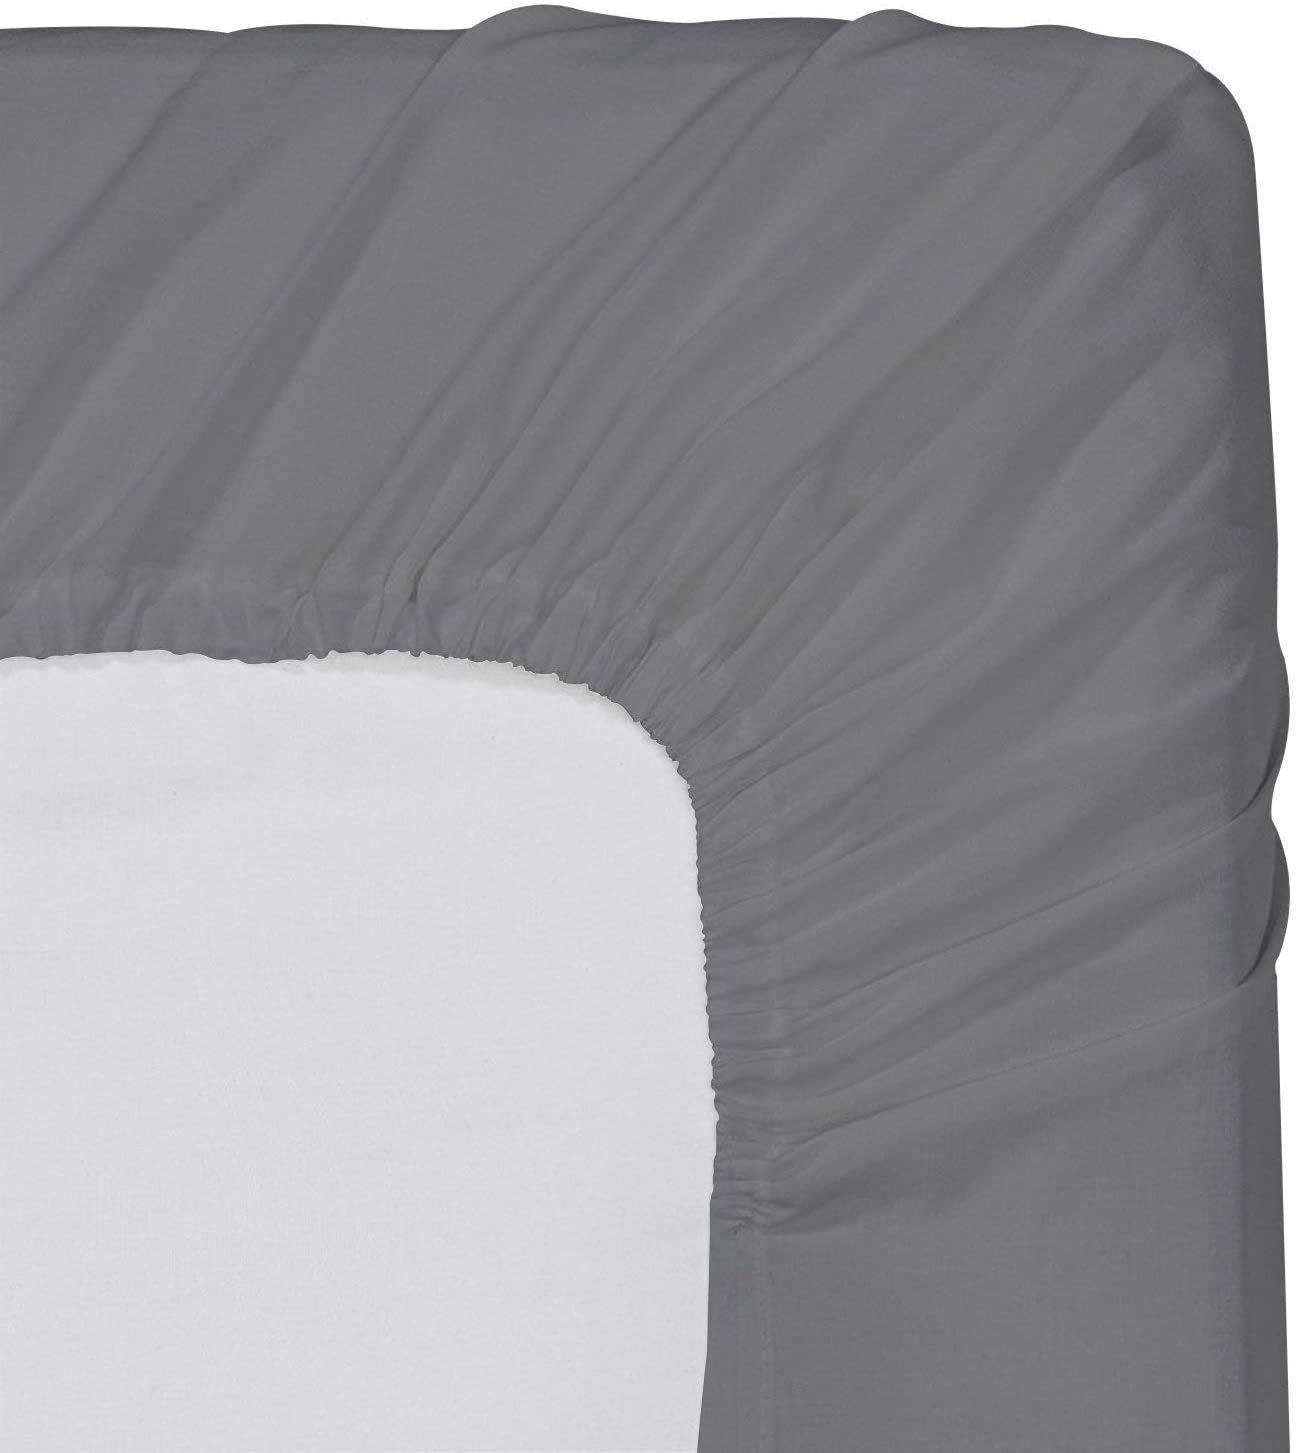 35 cm 90 x 200 cm, Black Shrinkage and Fade Resistant Utopia Bedding Fitted Sheet - Easy Care Soft Brushed Microfibre Fabric Deep Pocket 14 inch